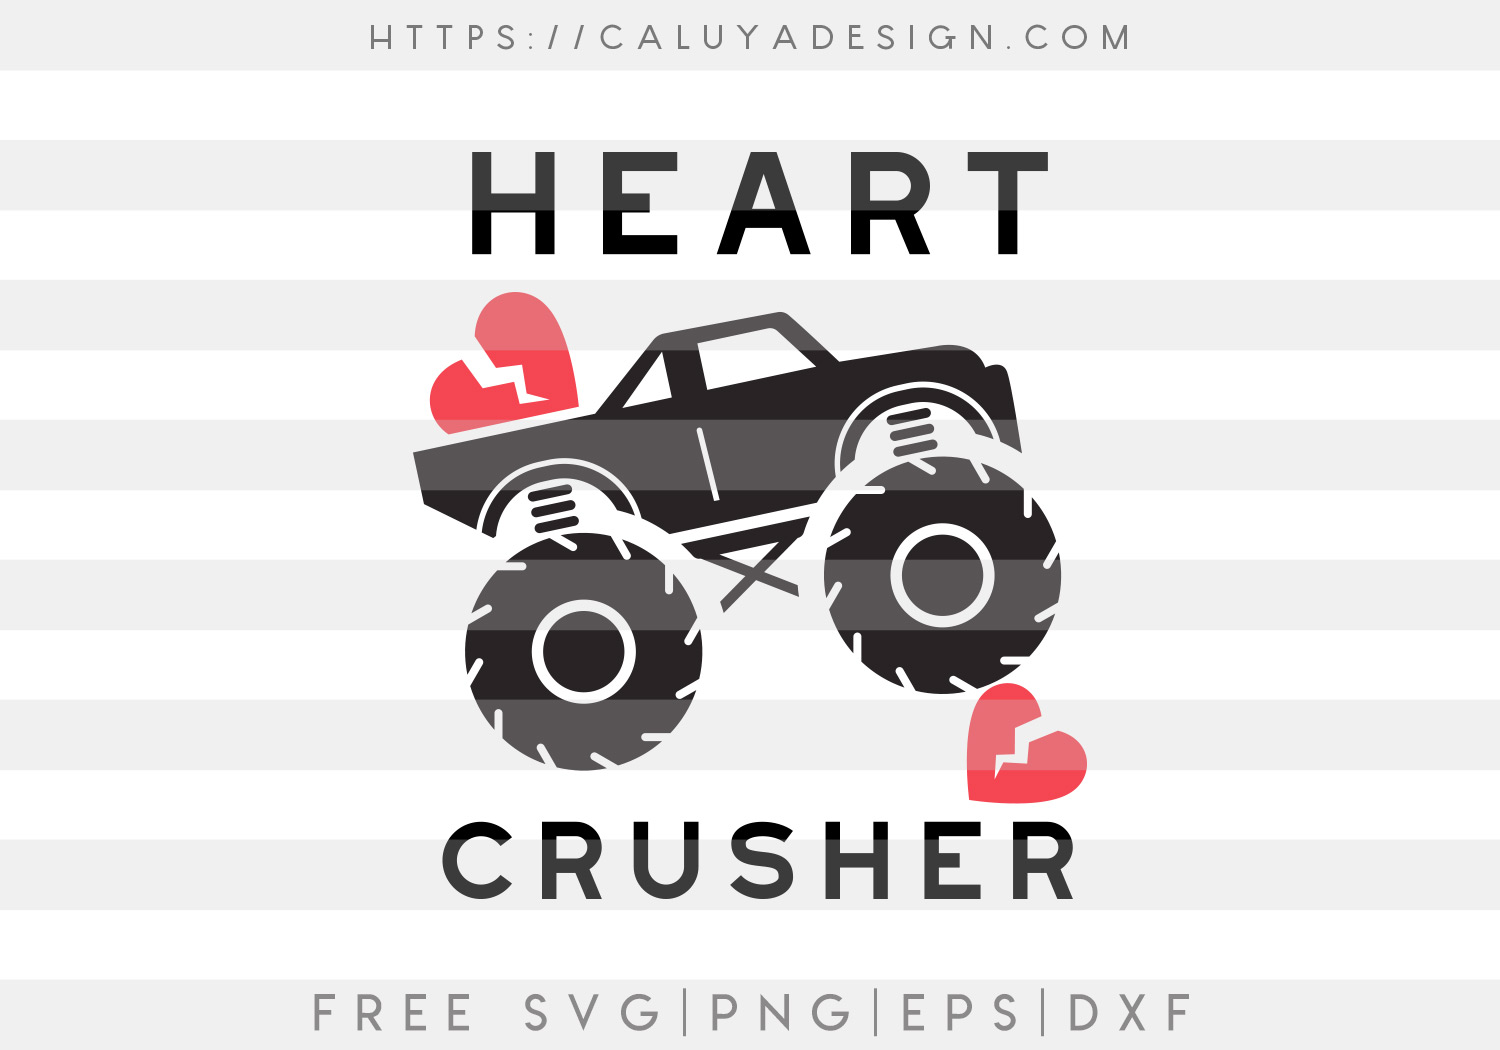 Download Free Heart Crusher With Arrow Svg Png Eps Dxf By Caluya Design